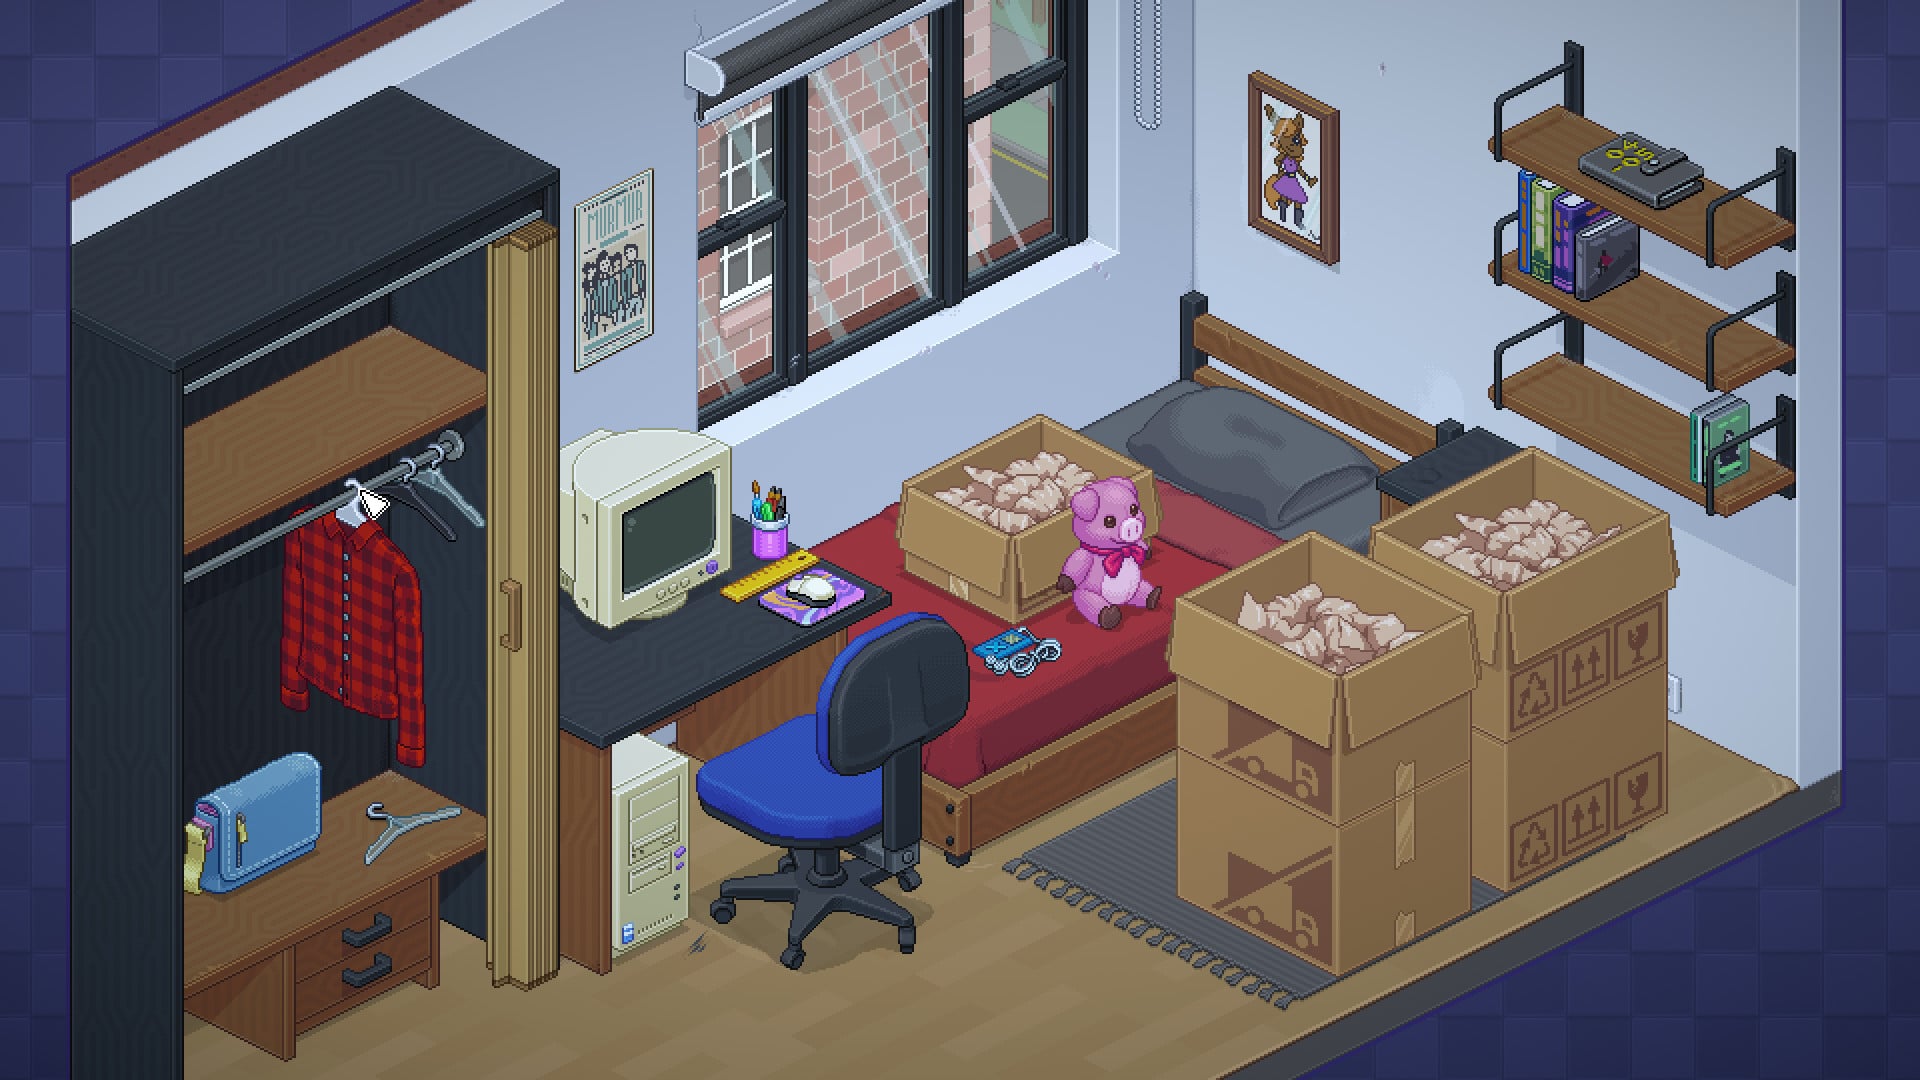 Unpacking is a Game Where You Do Stuff No One Wants to Do in Real Life, but It’s Super Zen